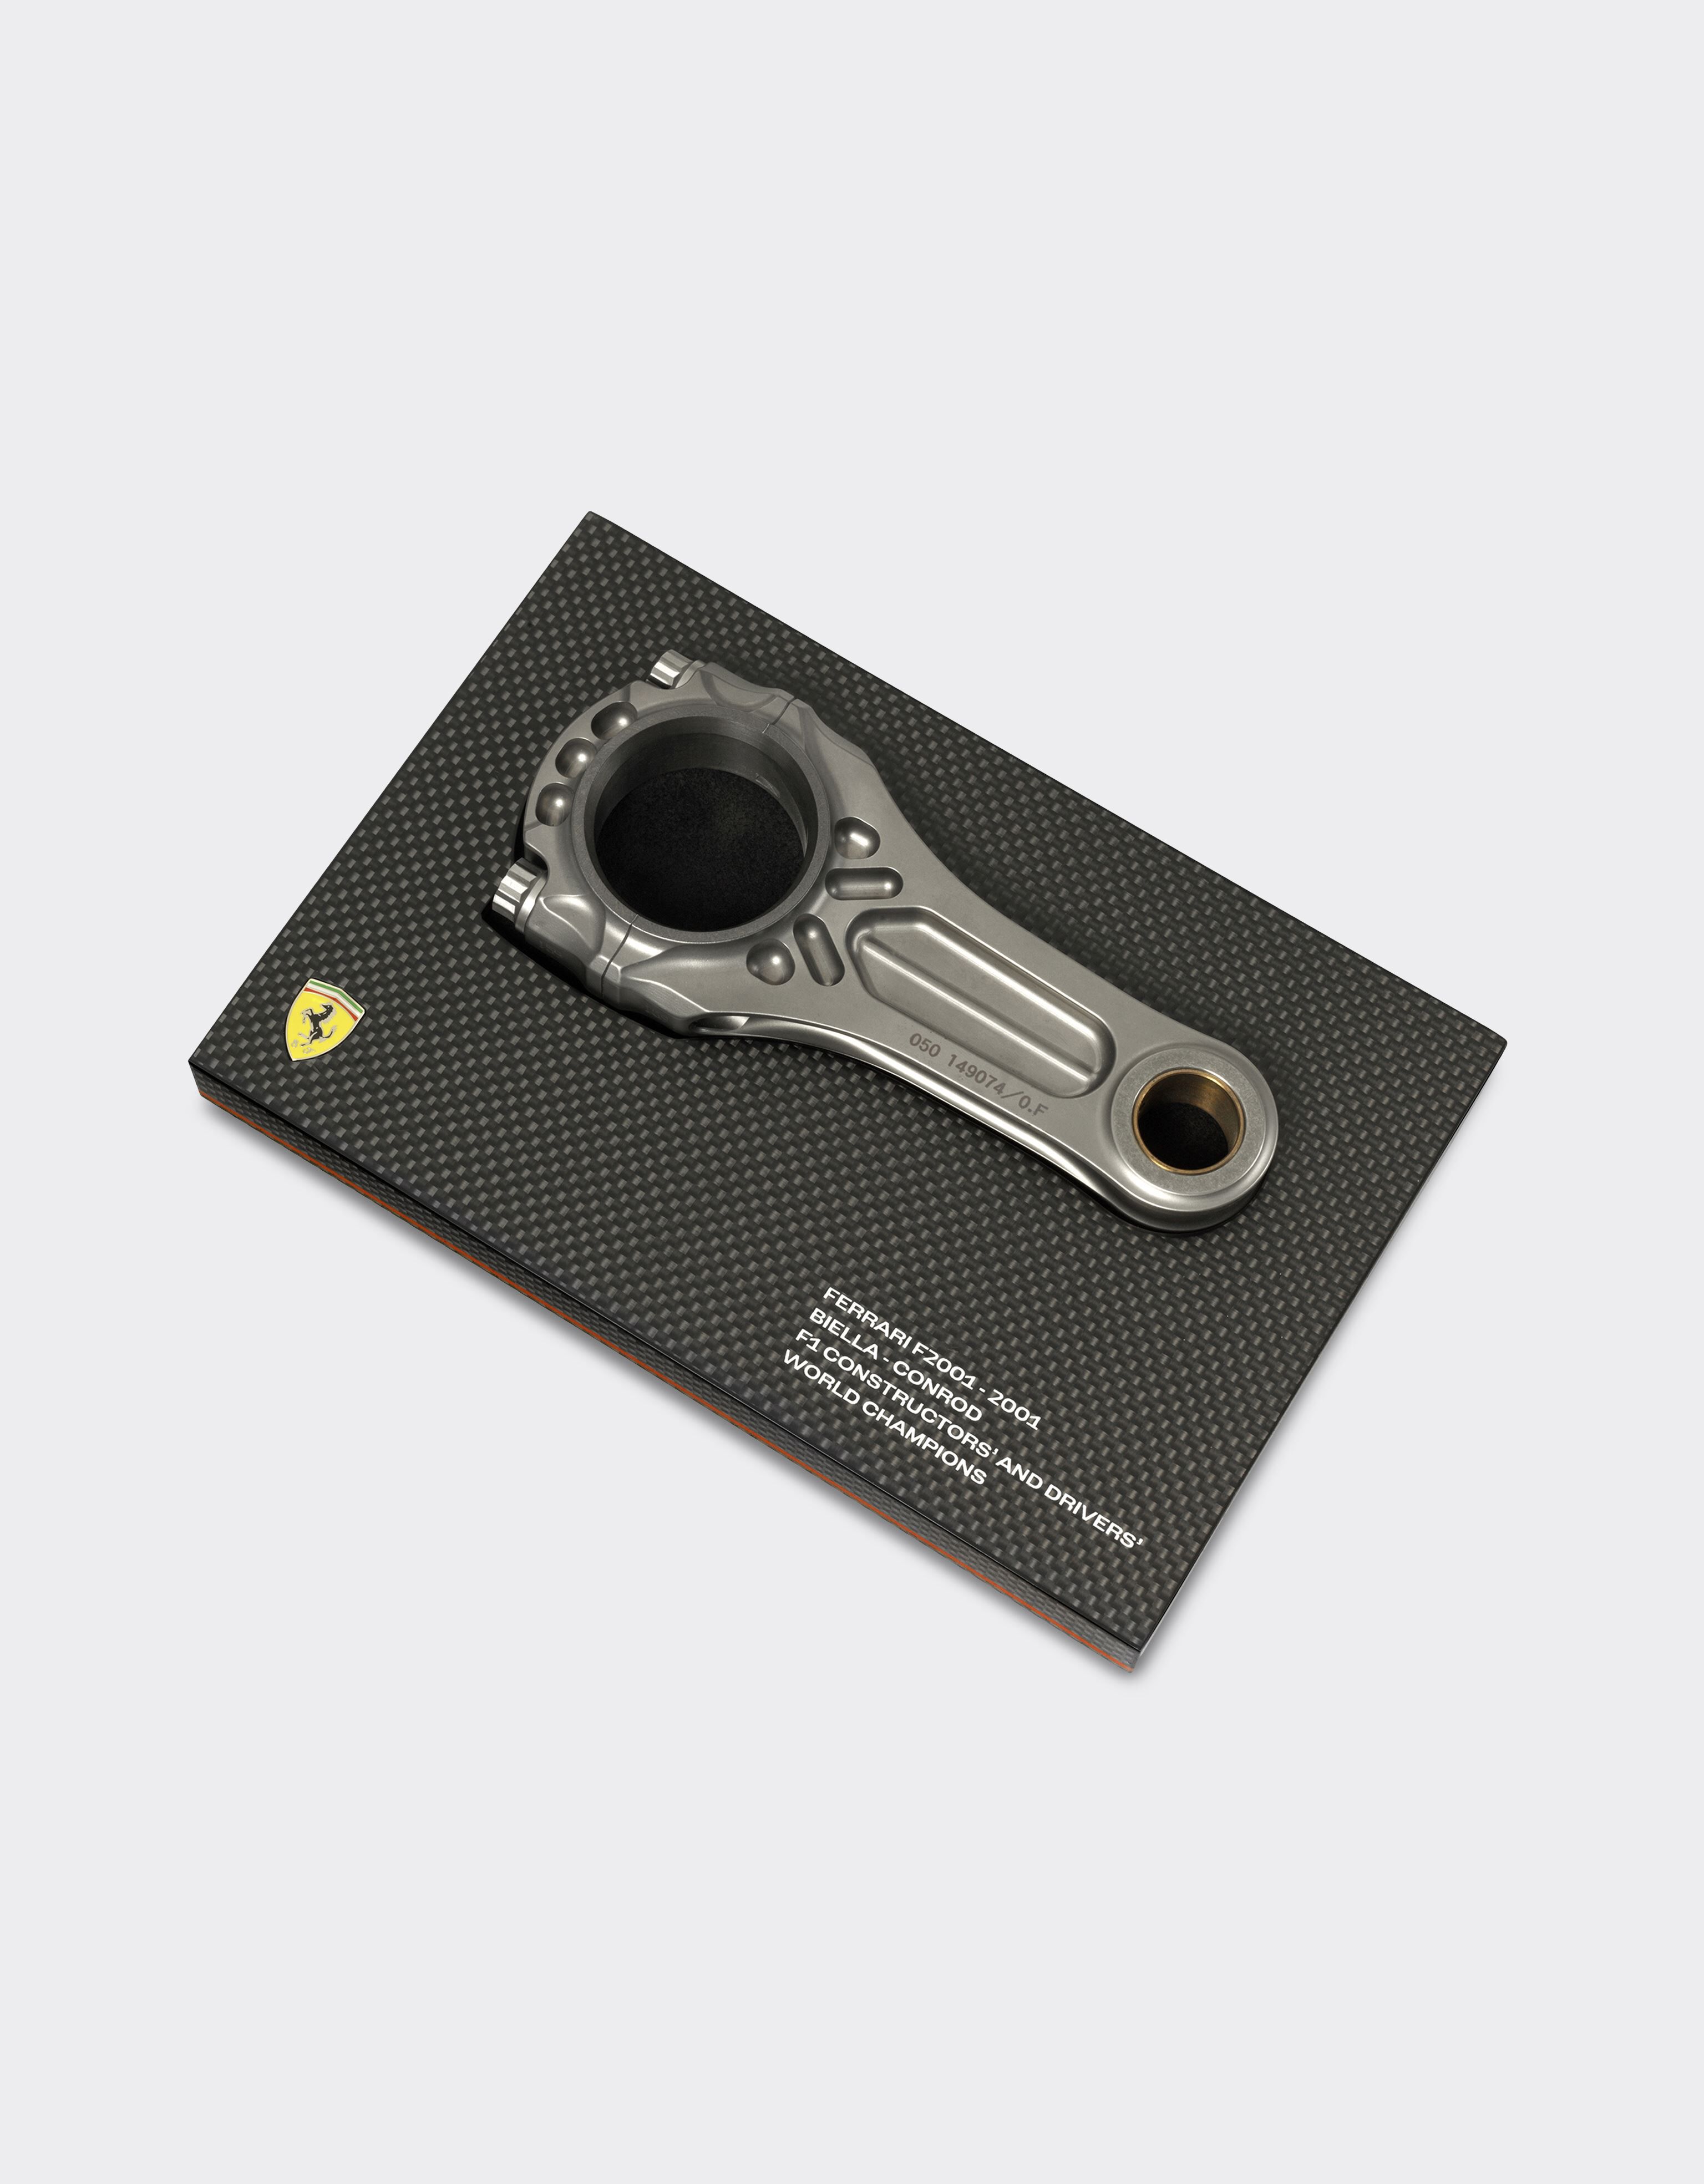 Ferrari Original connecting rod from the F2001, winner of the 2001 Constructors' and Drivers' Championships Black 47408f